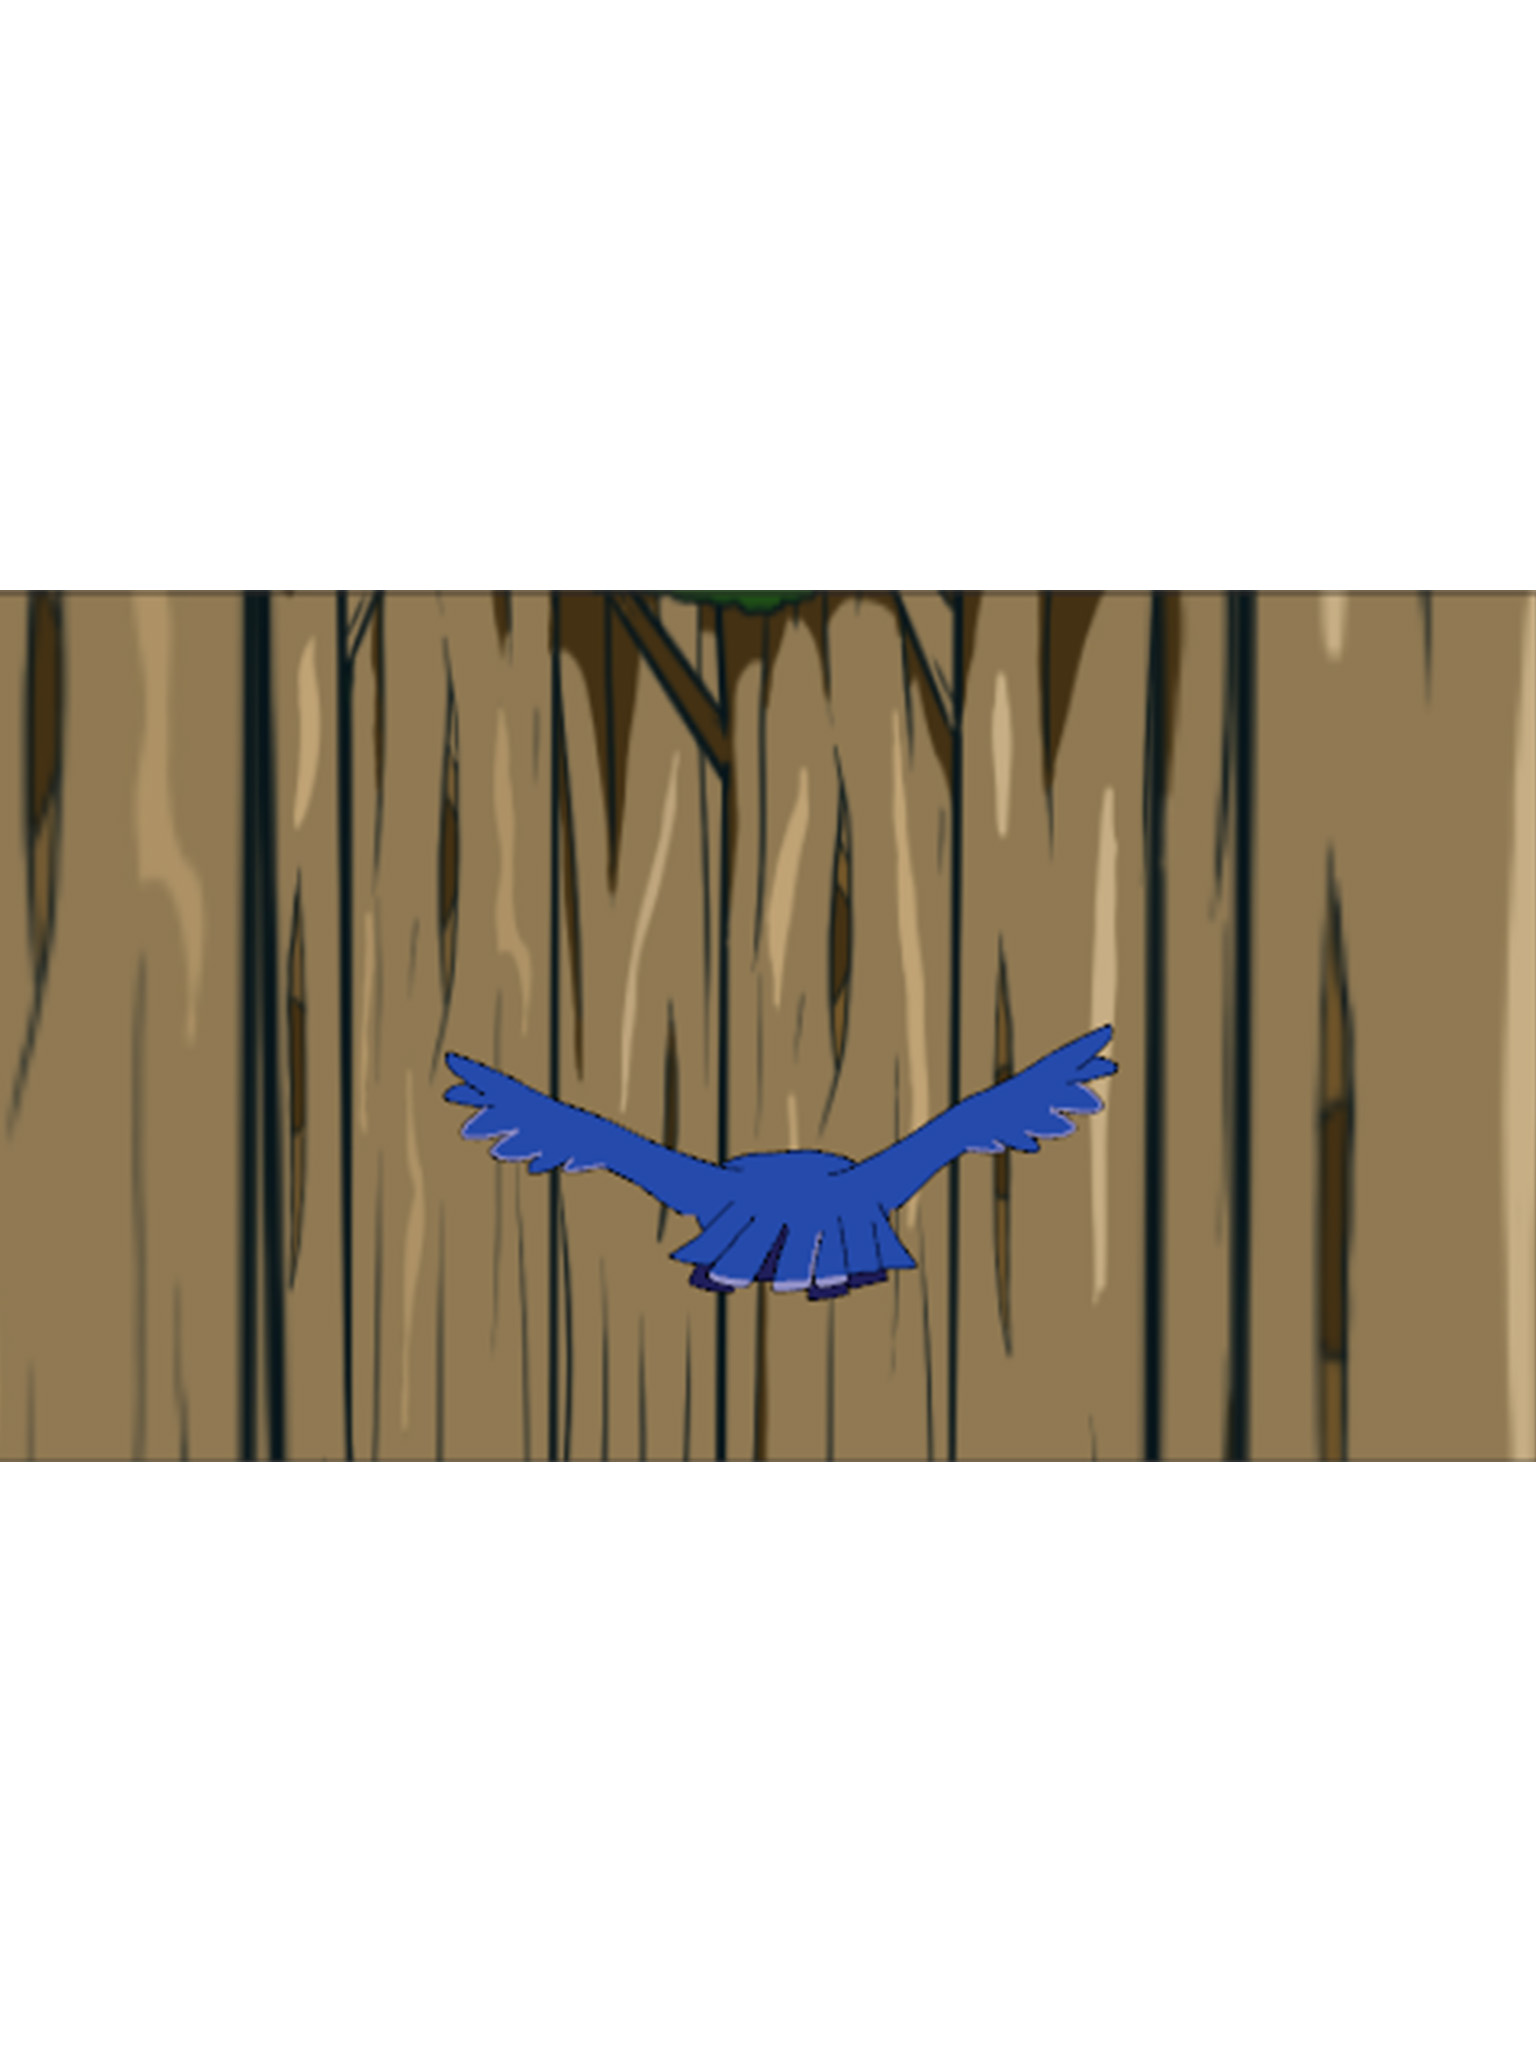  / Still of Whistling Thrush from "The Power of Music," is a 3-minute short 16:9 HD animation created using ToonBoom and AfterEffects